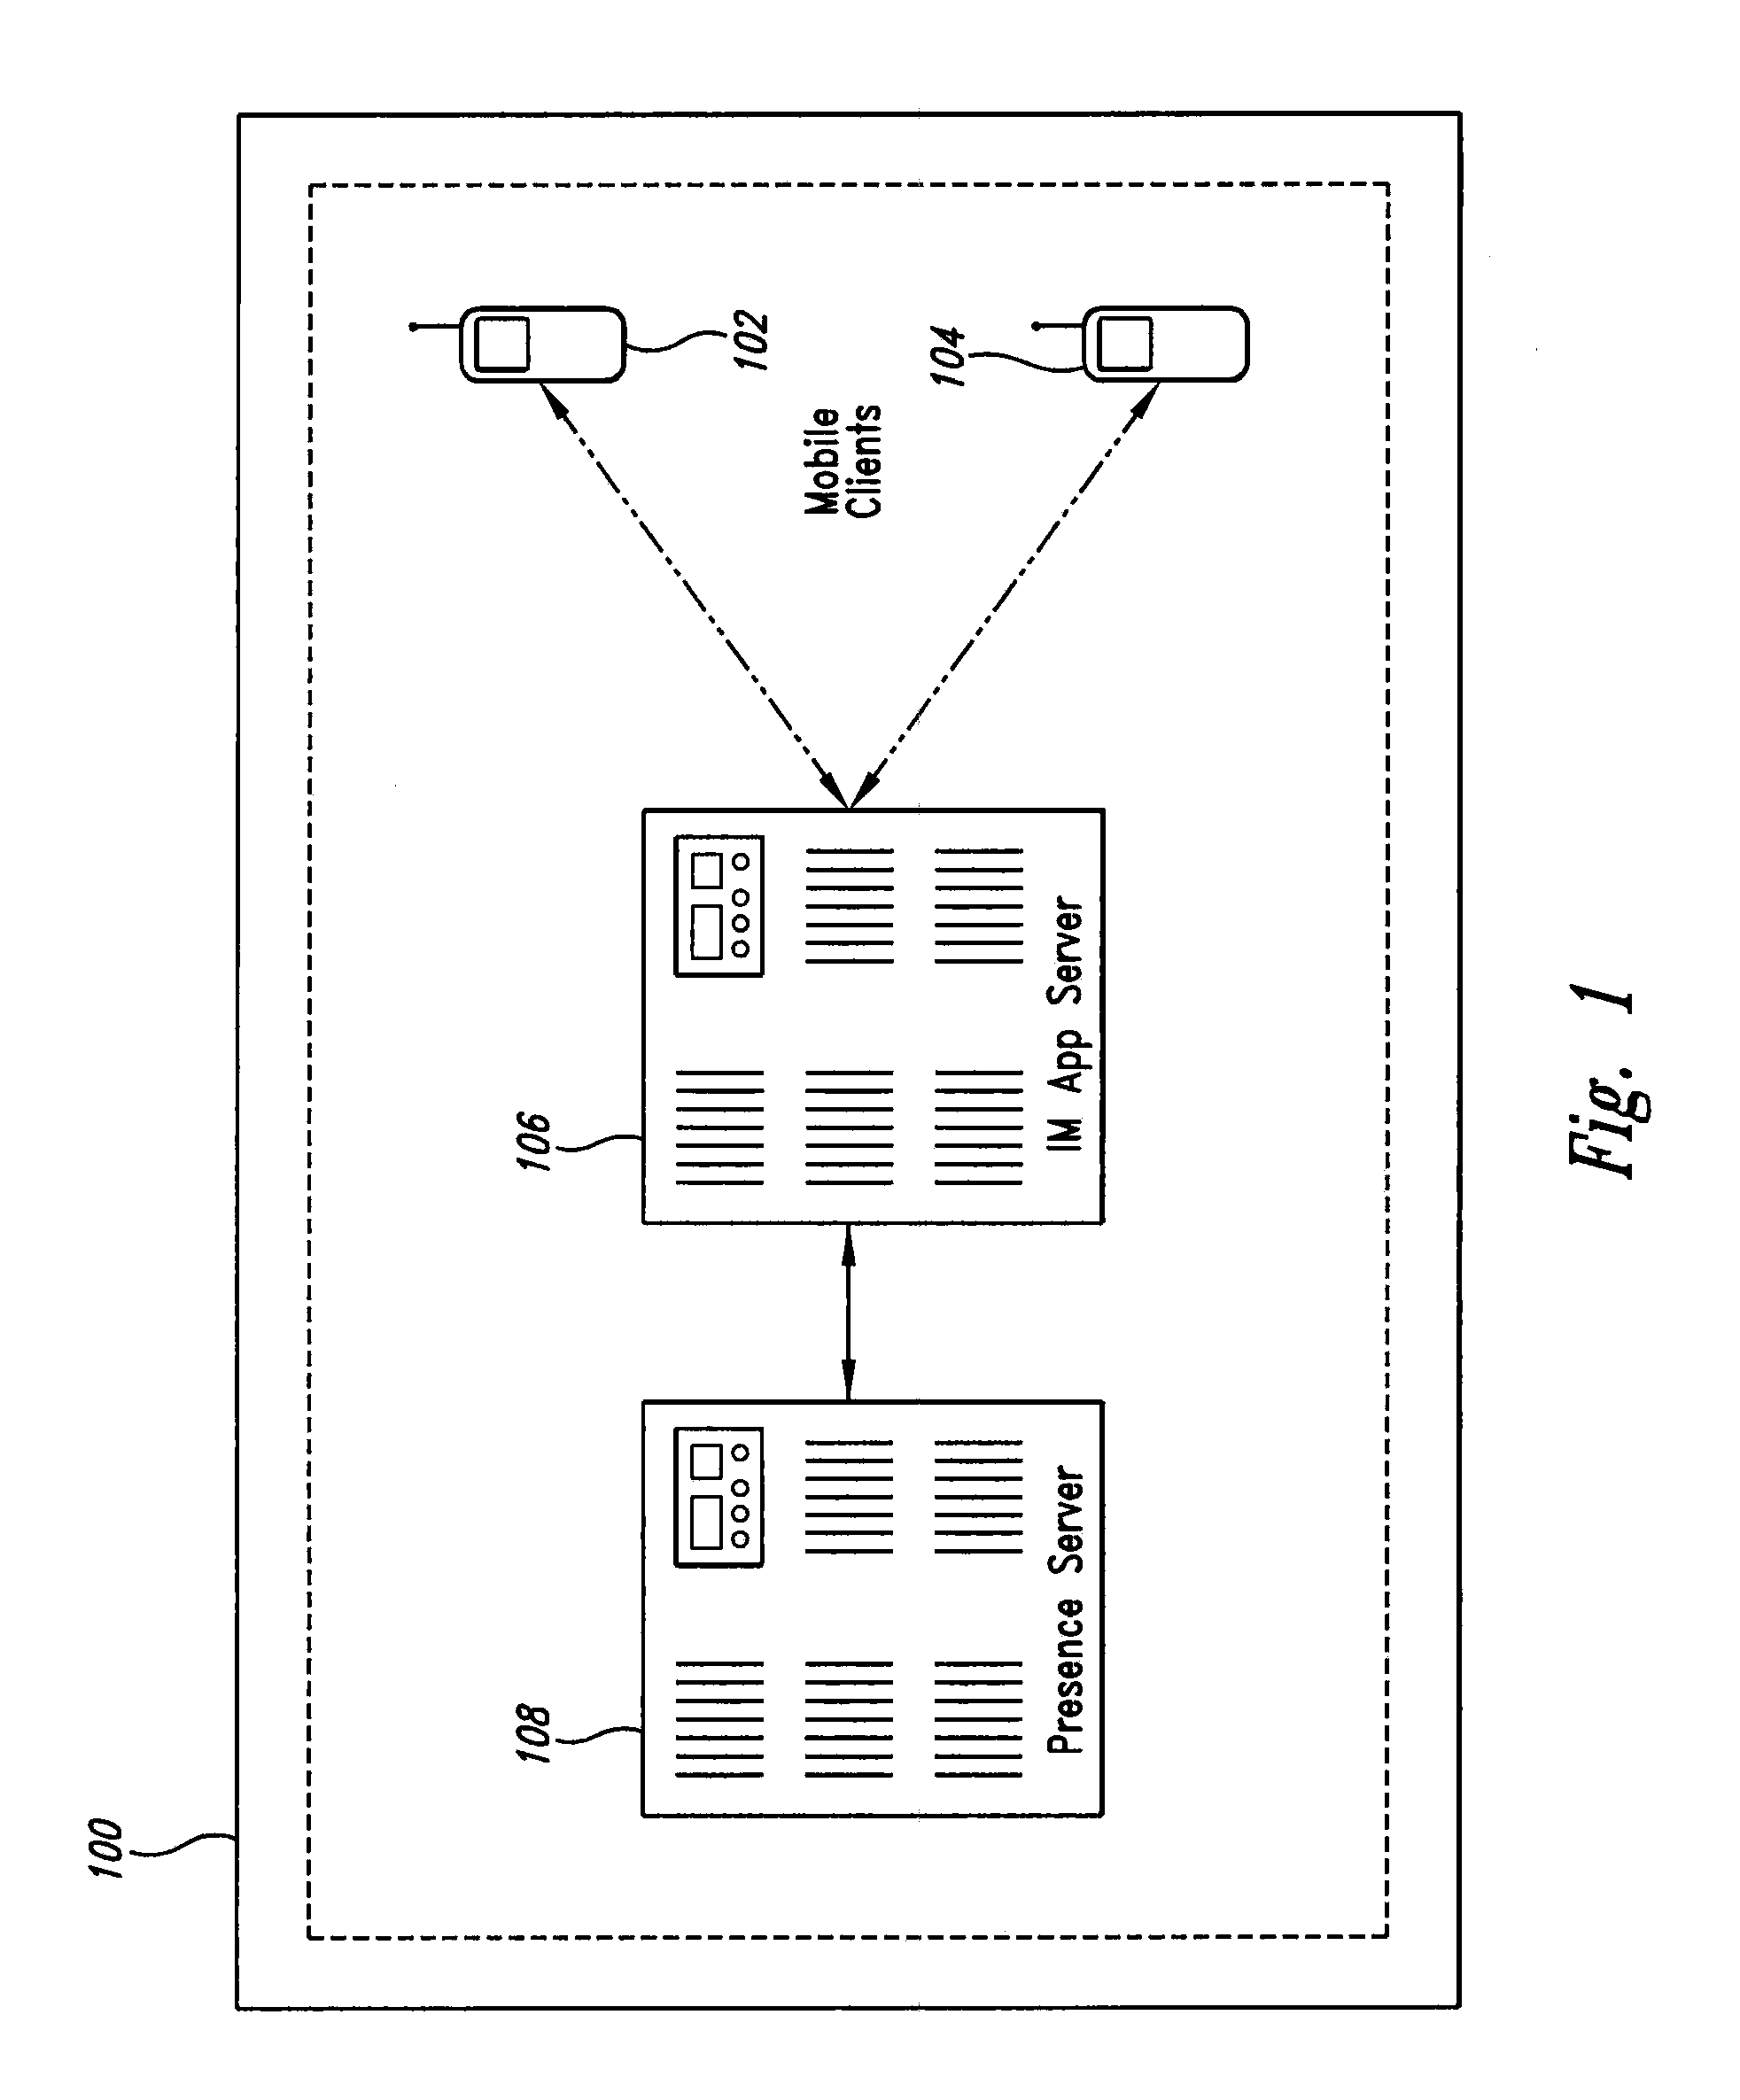 Methods and systems for providing application level presence information in wireless communication